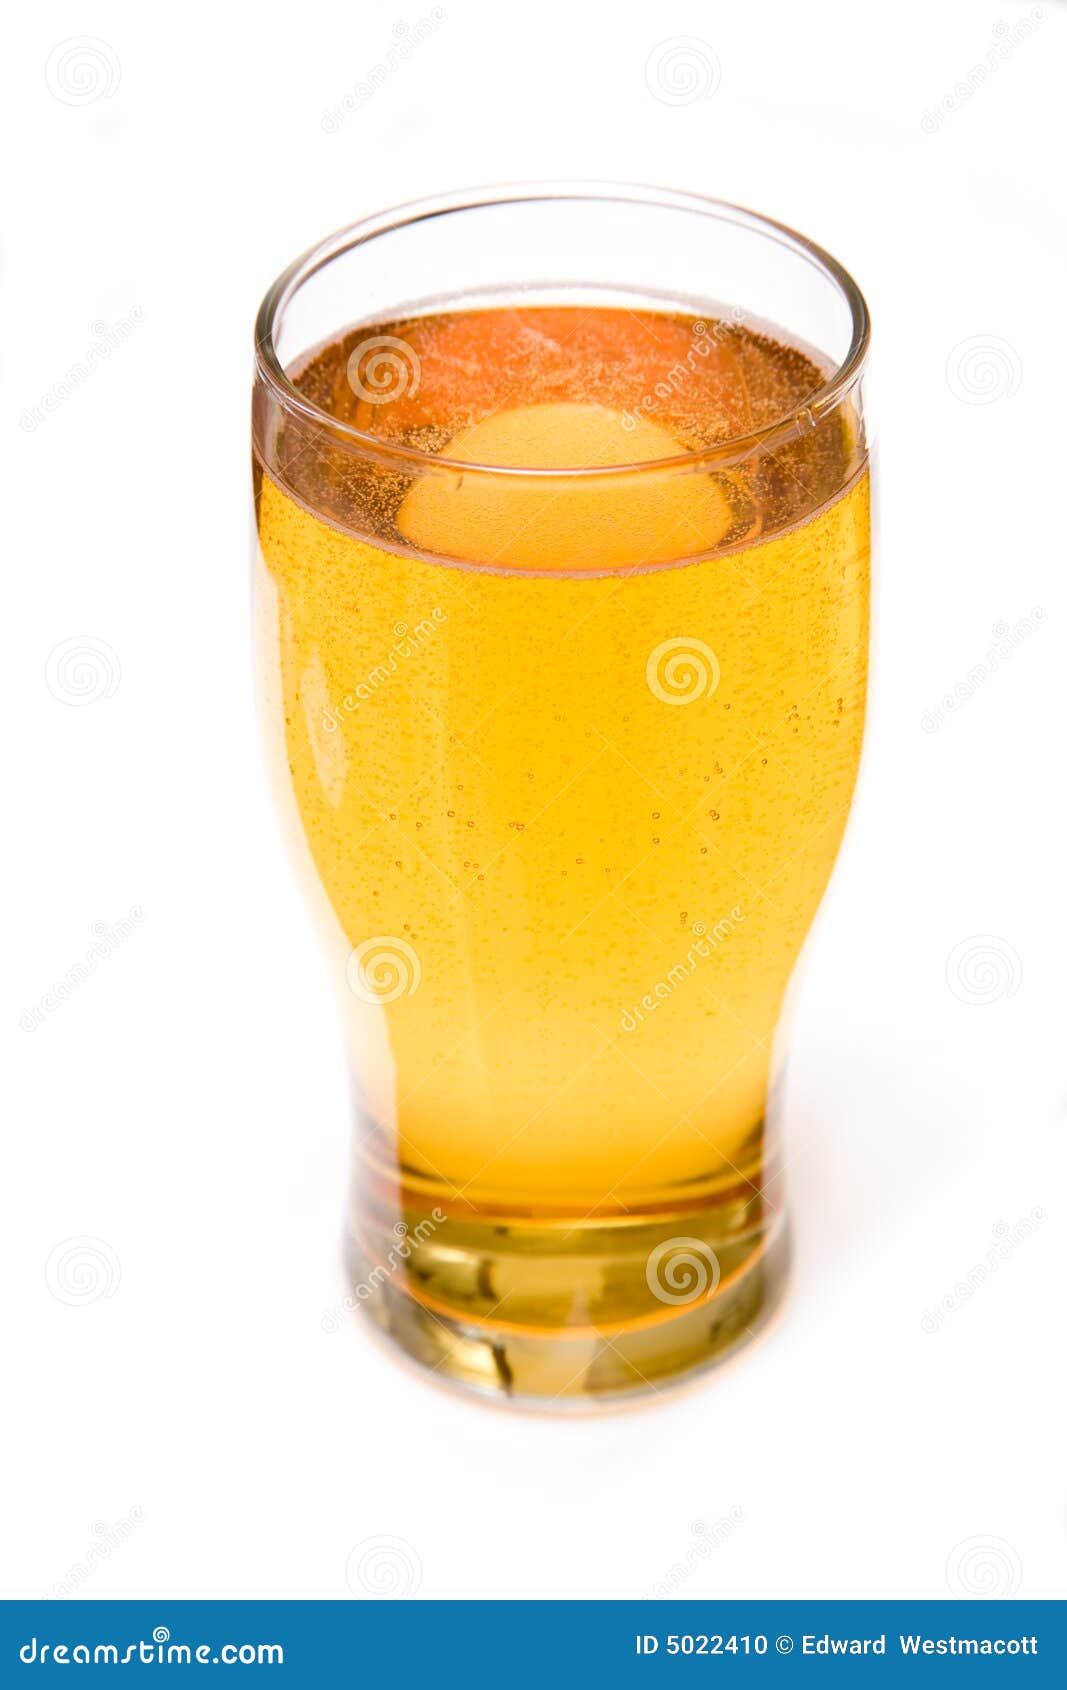 pint of hard cider in a glass